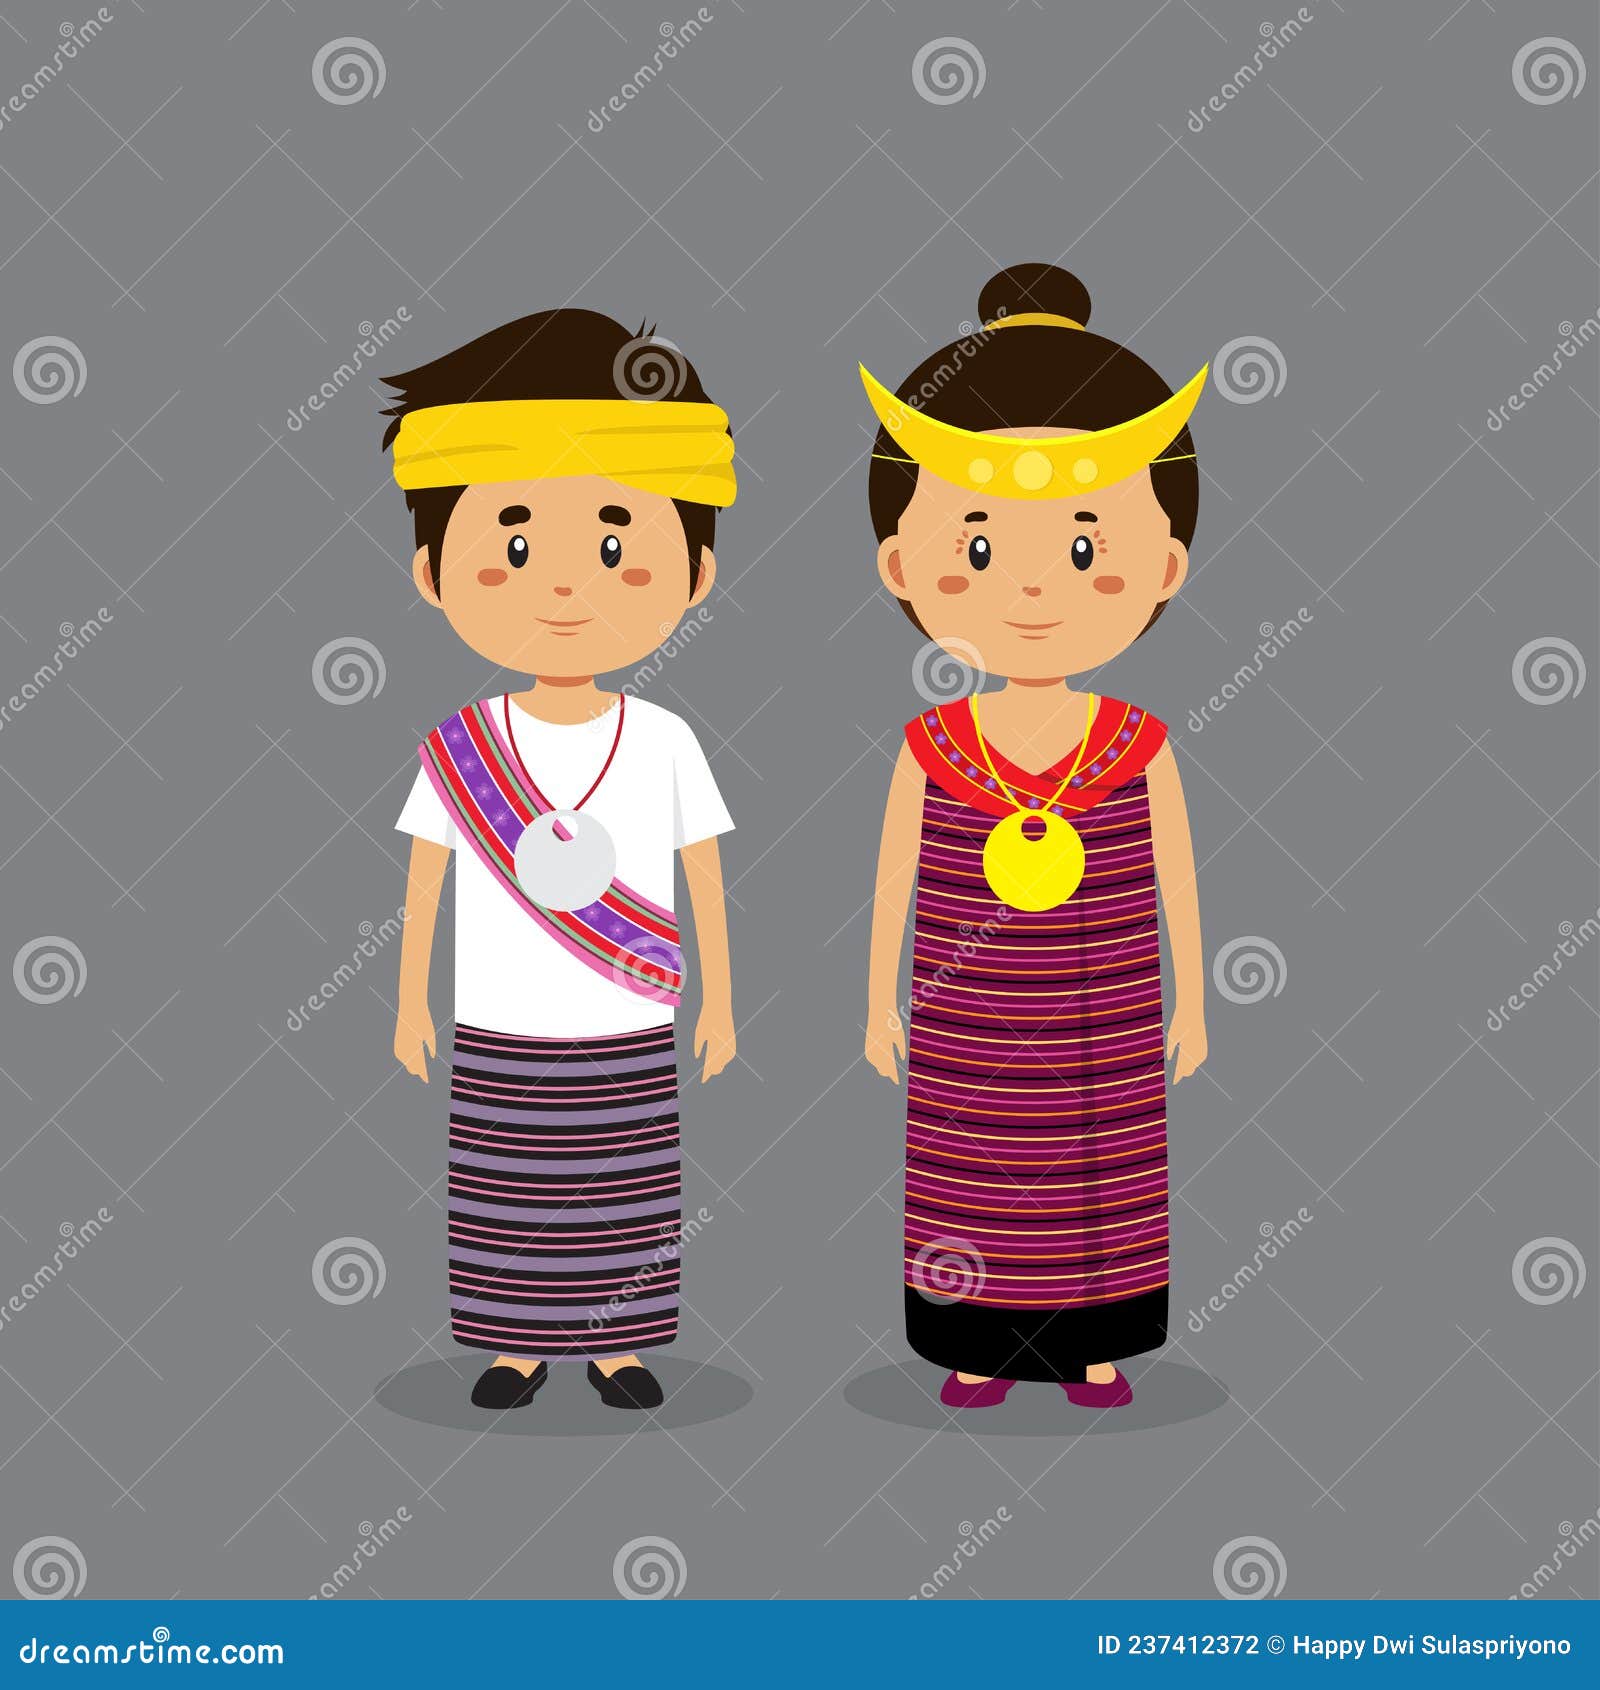 couple character wearing timur leste national dress